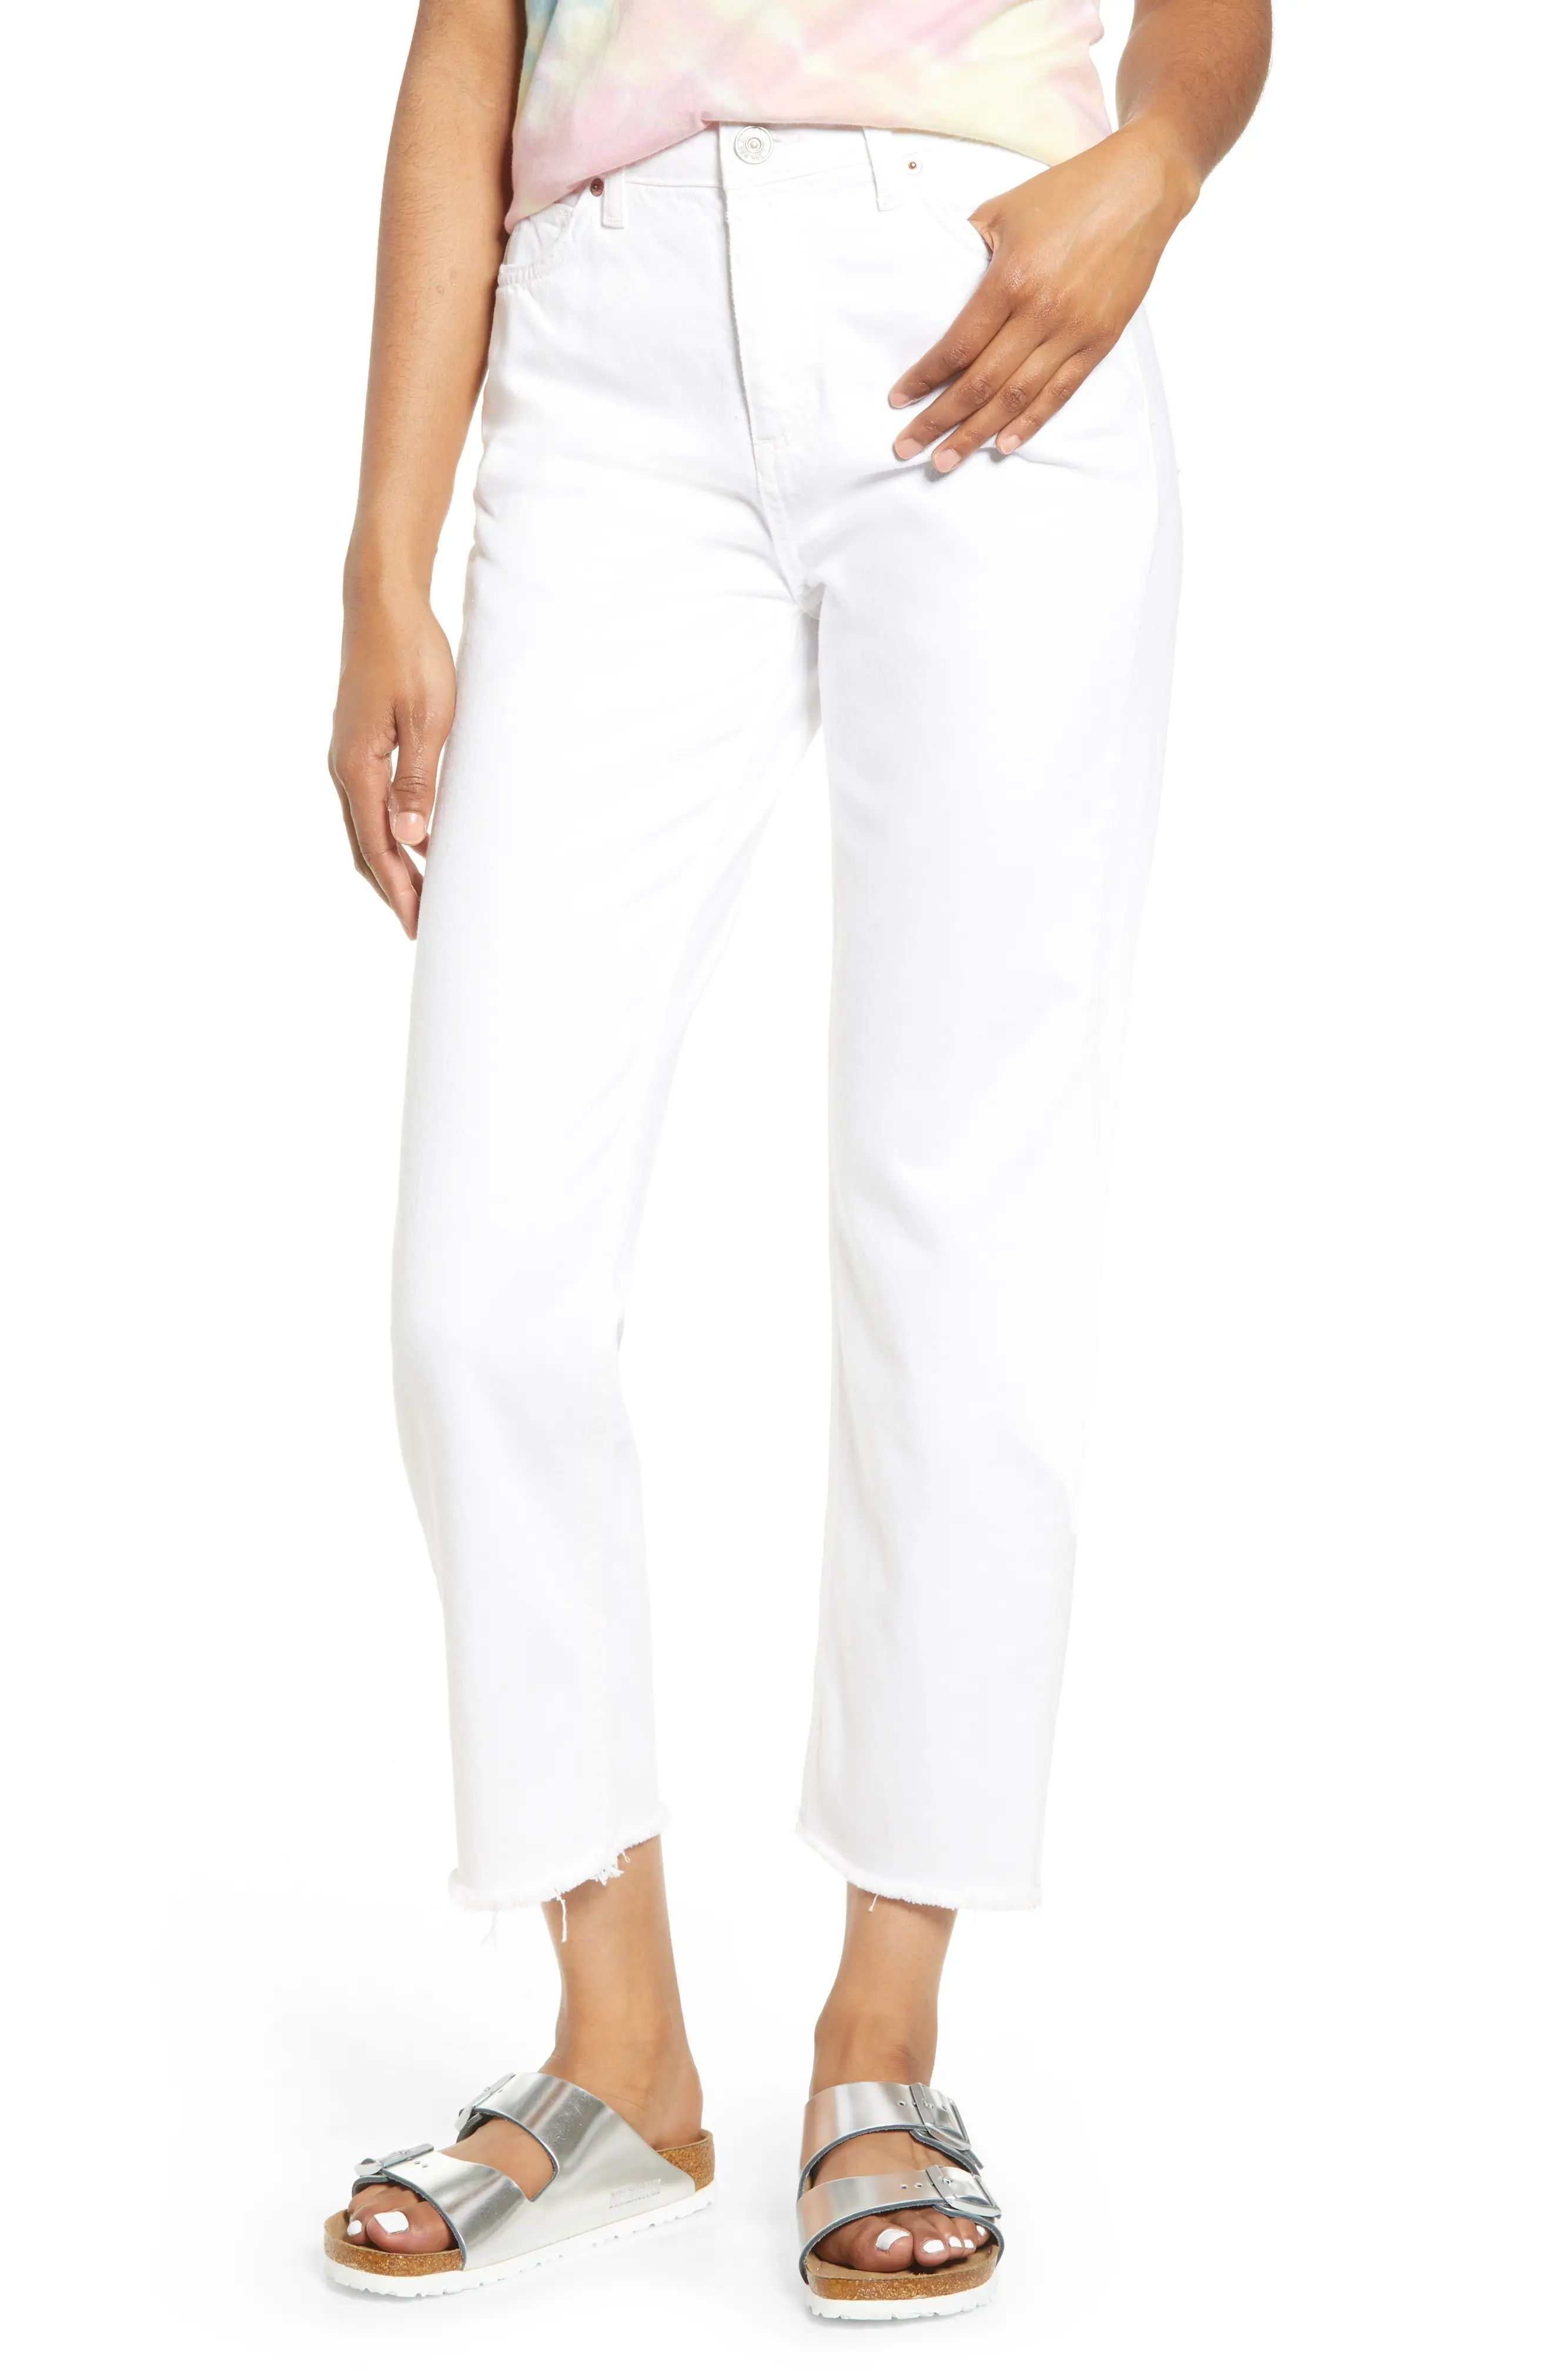 Women's Bdg Urban Outfitters Pax High Waist Crop Jeans, Size 26 - White | Nordstrom